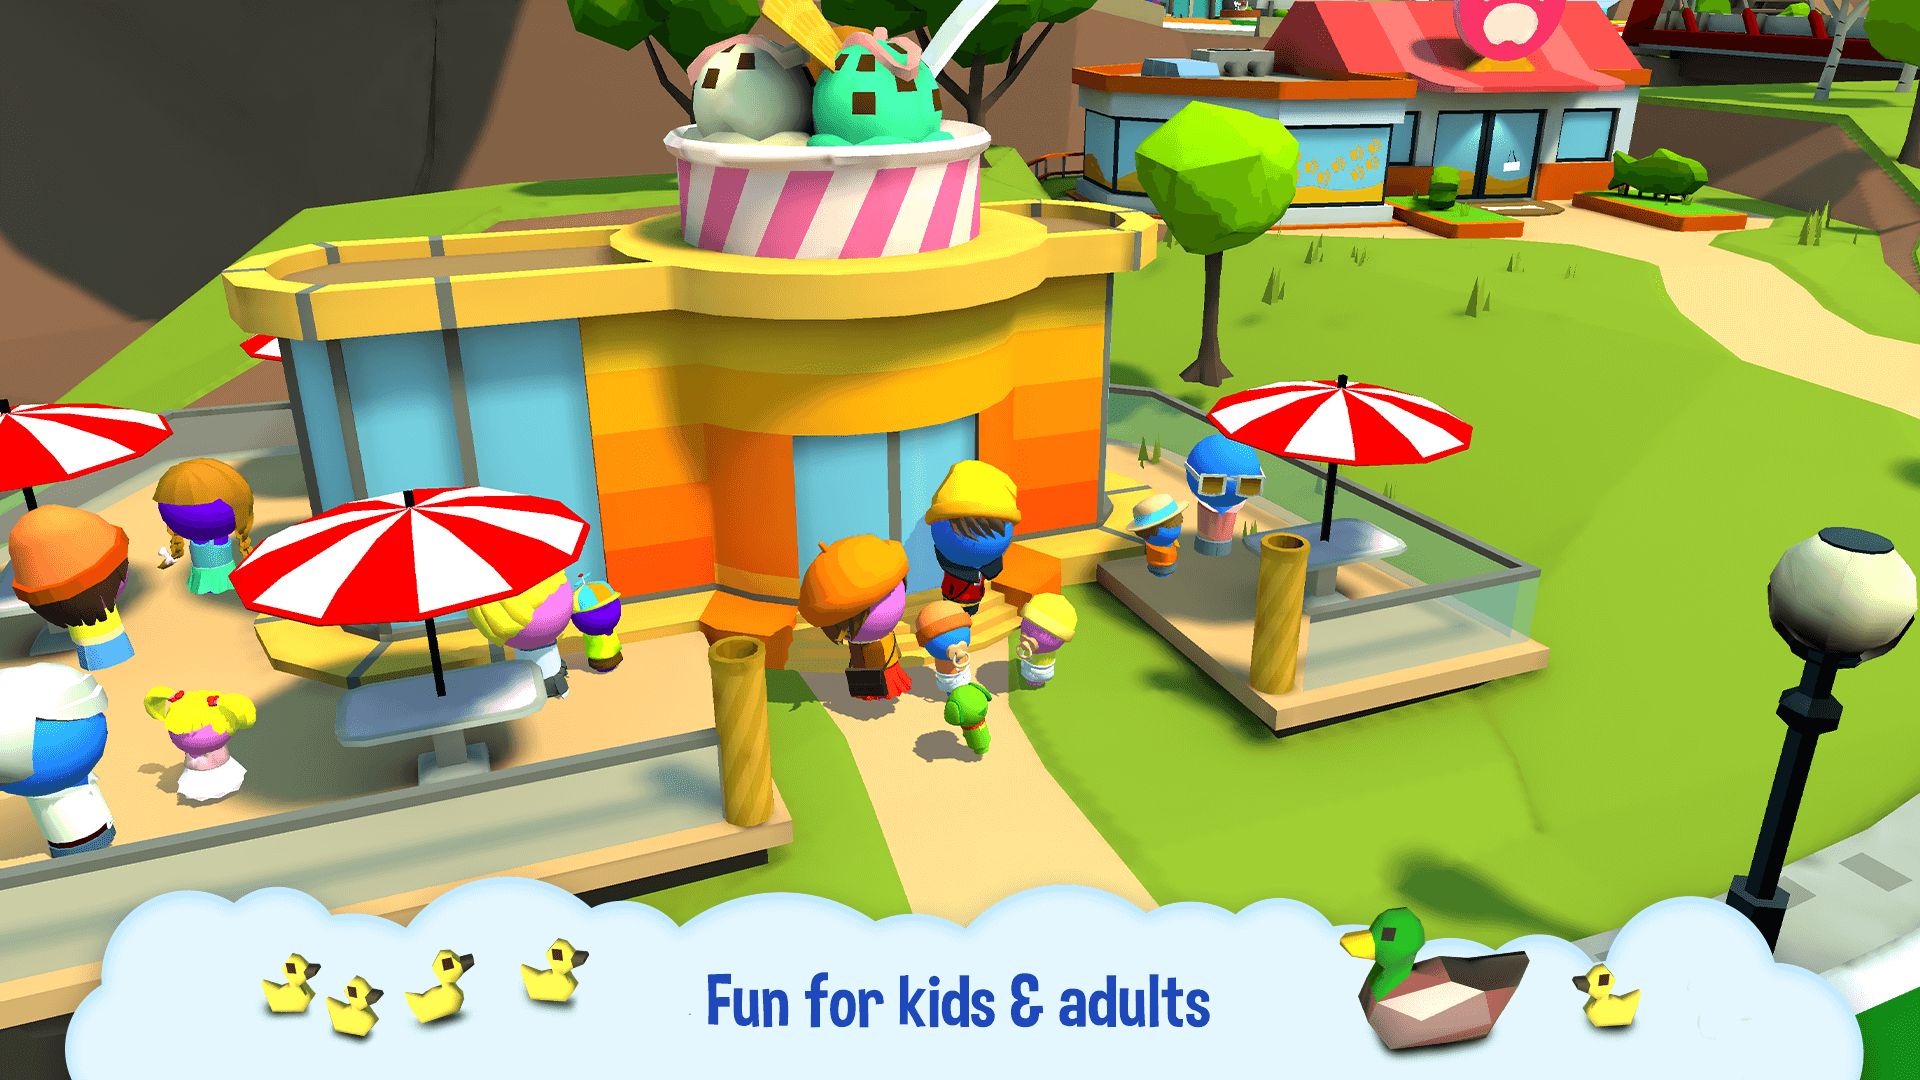 THE GAME OF LIFE 2 - More choices, more freedom! screenshot 1